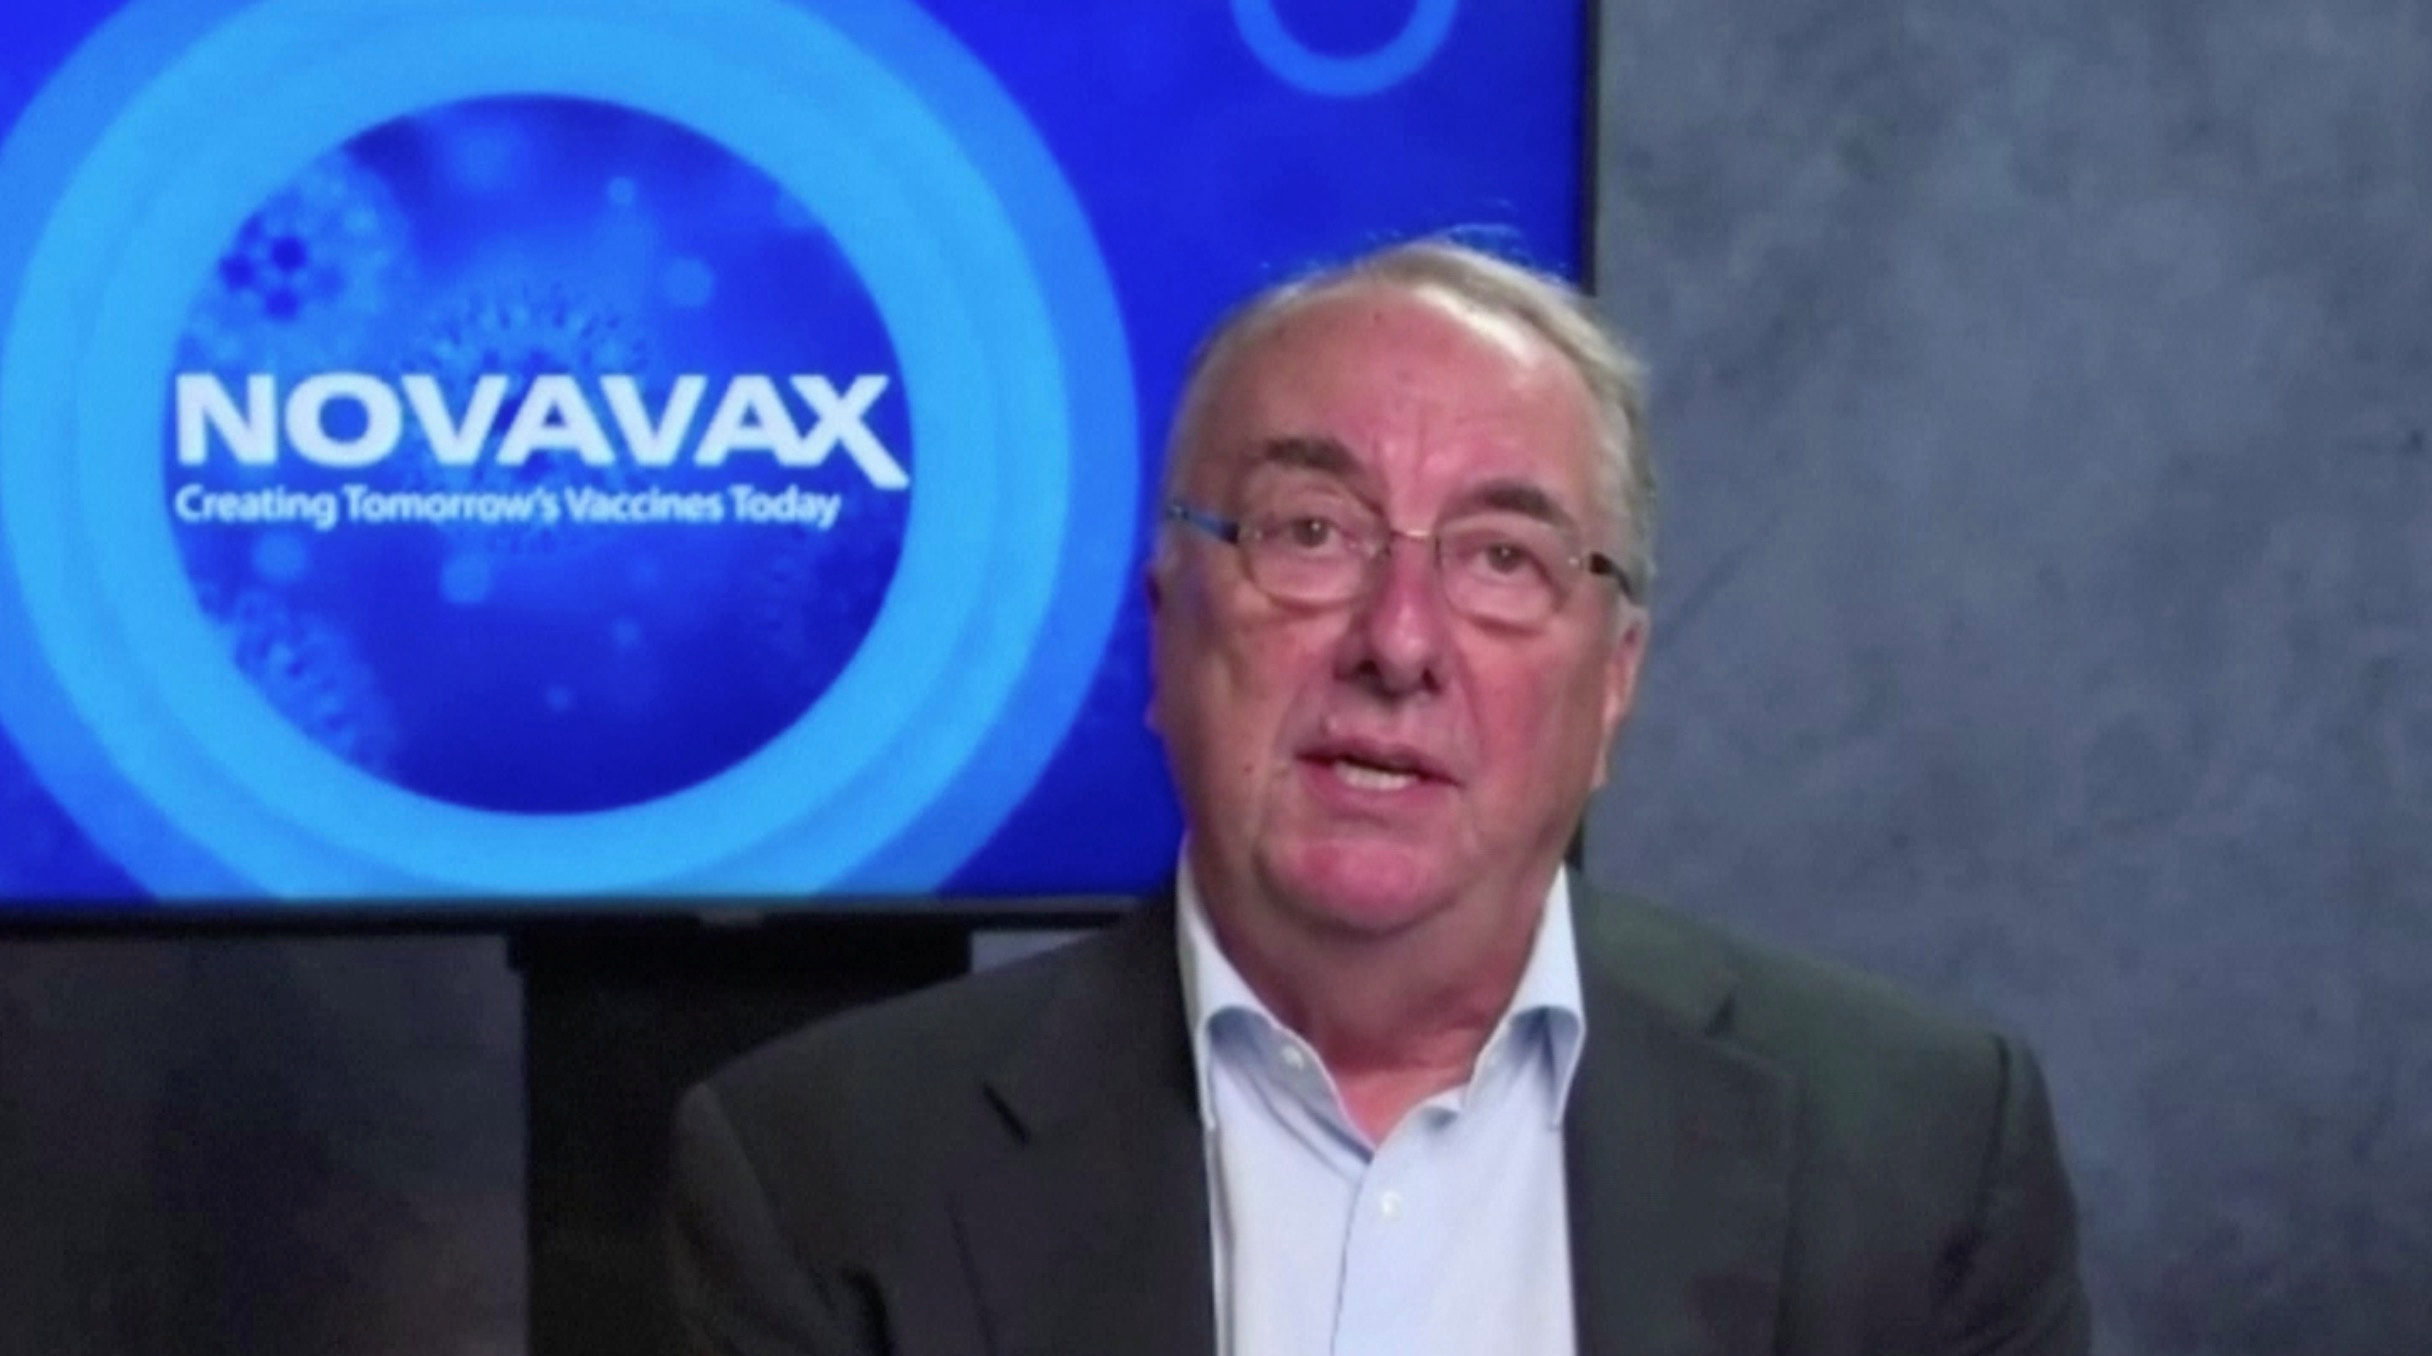 Novavax CEO Erck speaks in this still image taken from an interview on Zoom